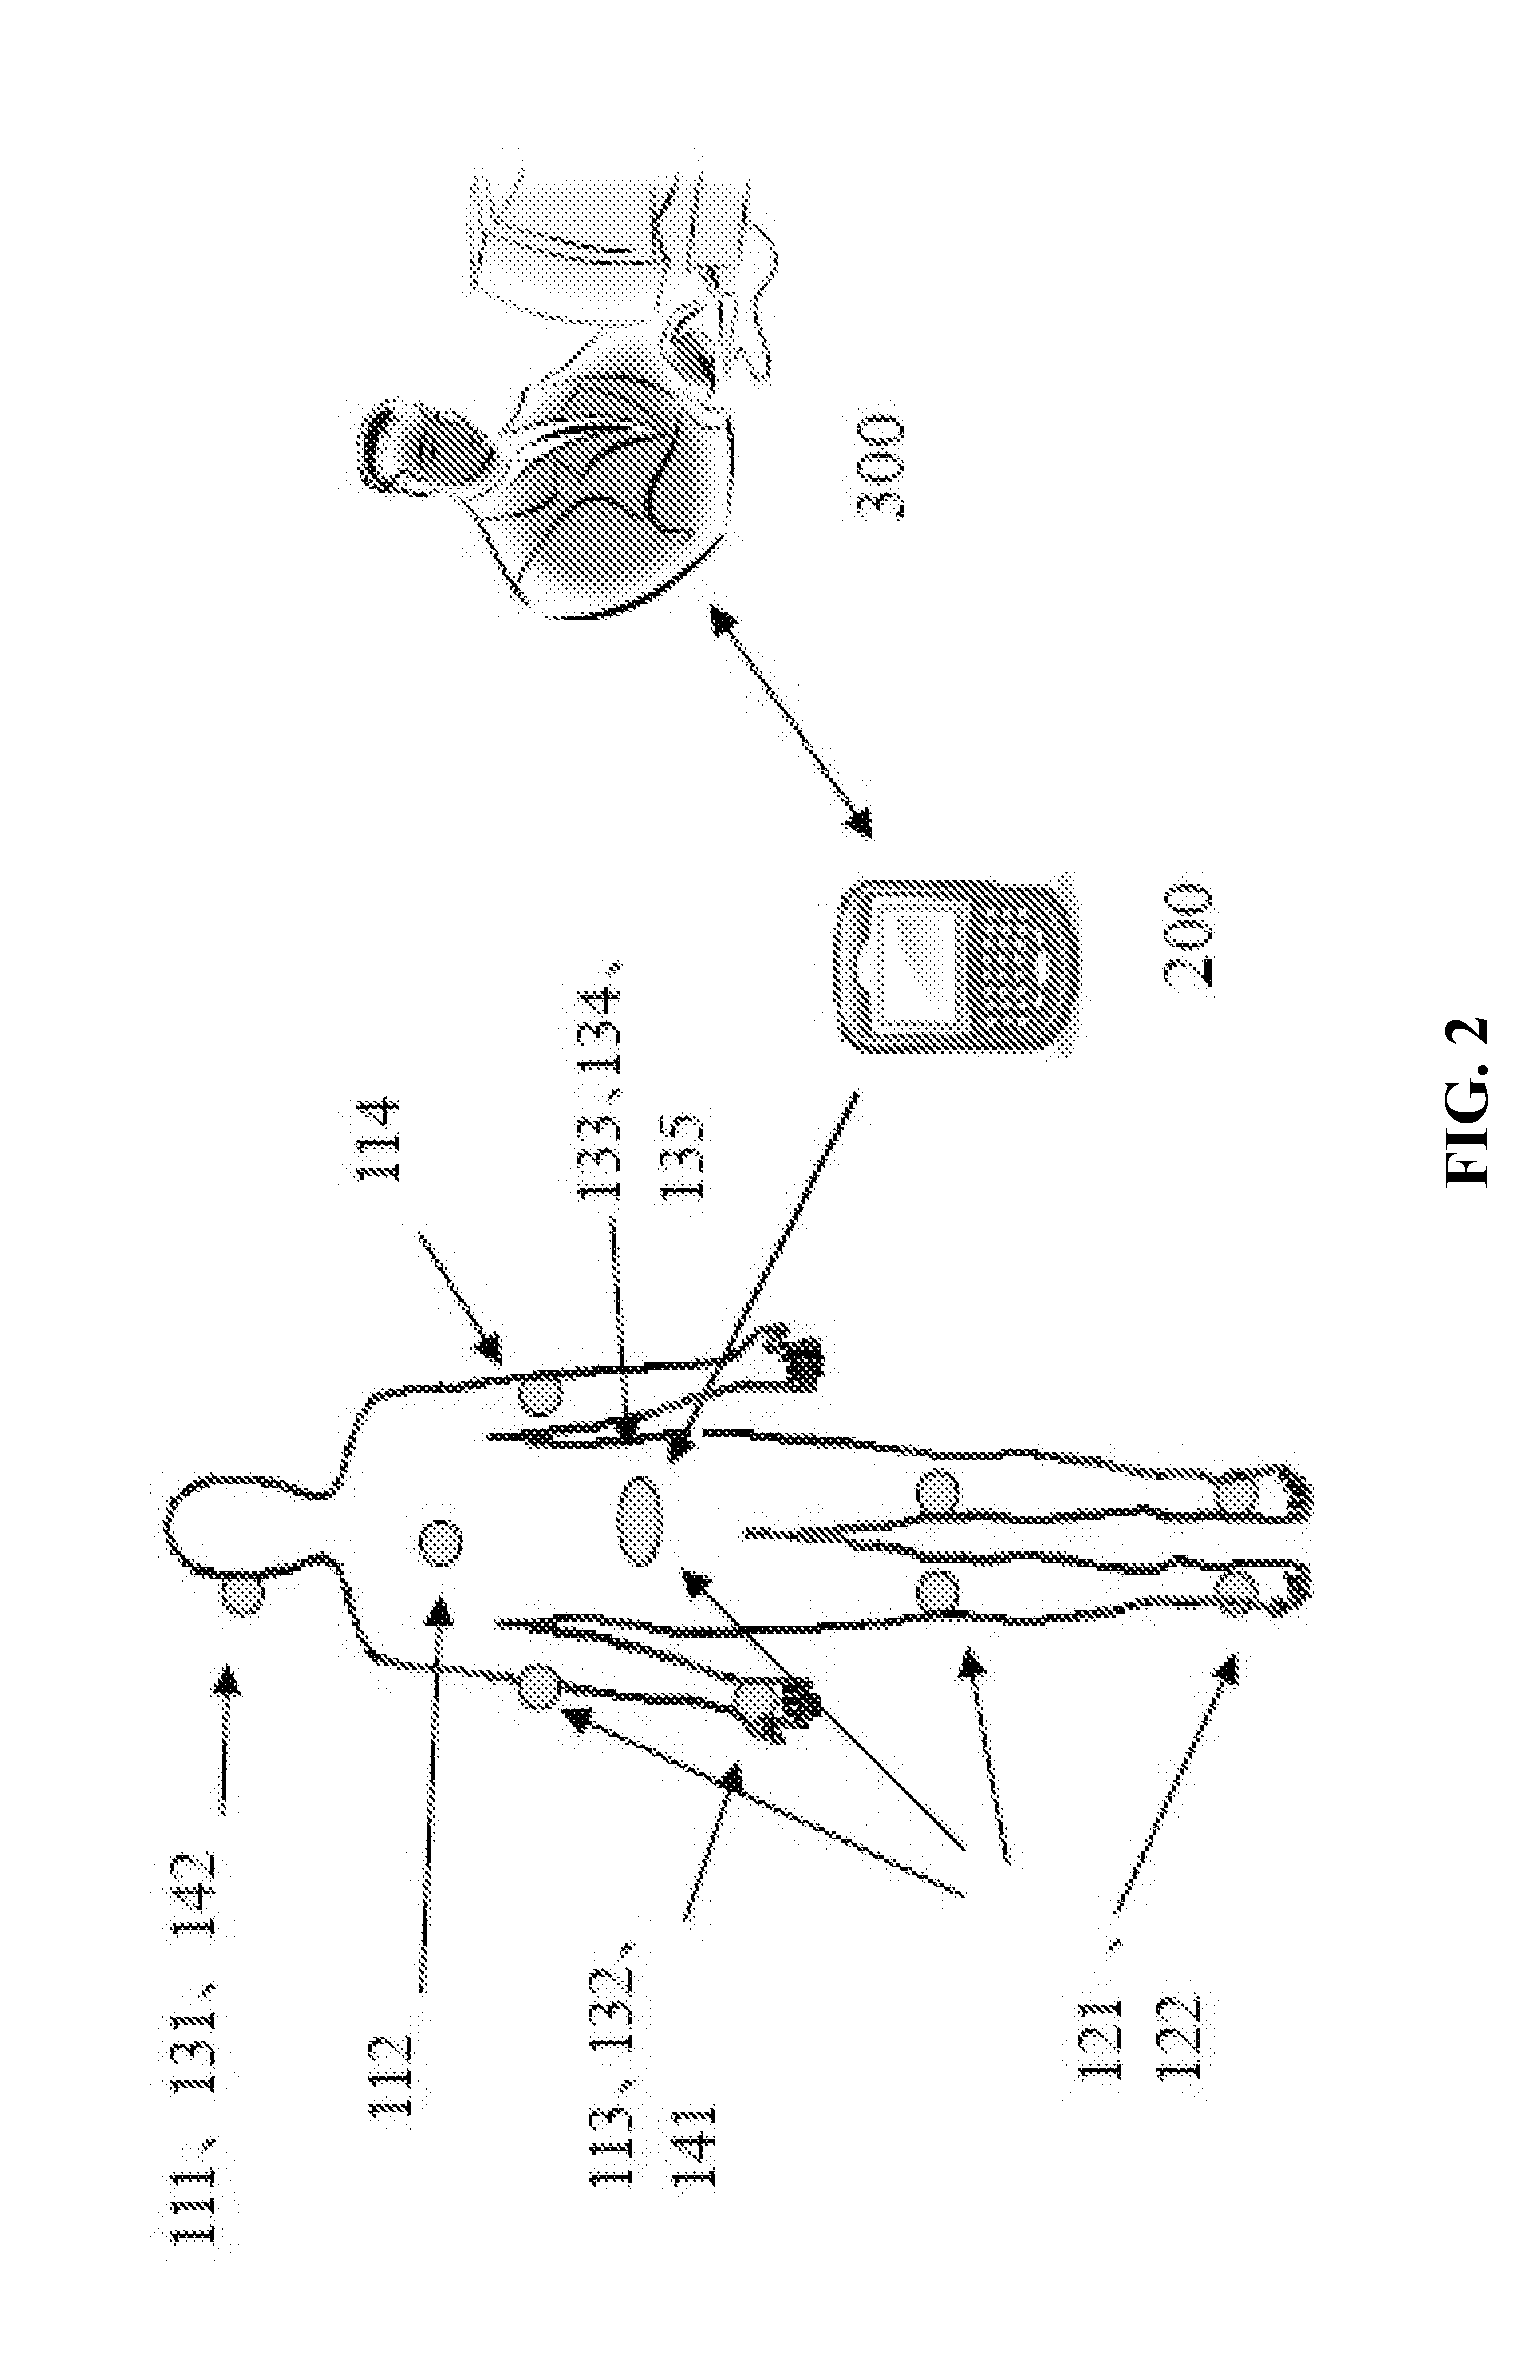 Body sign dynamically monitoring system